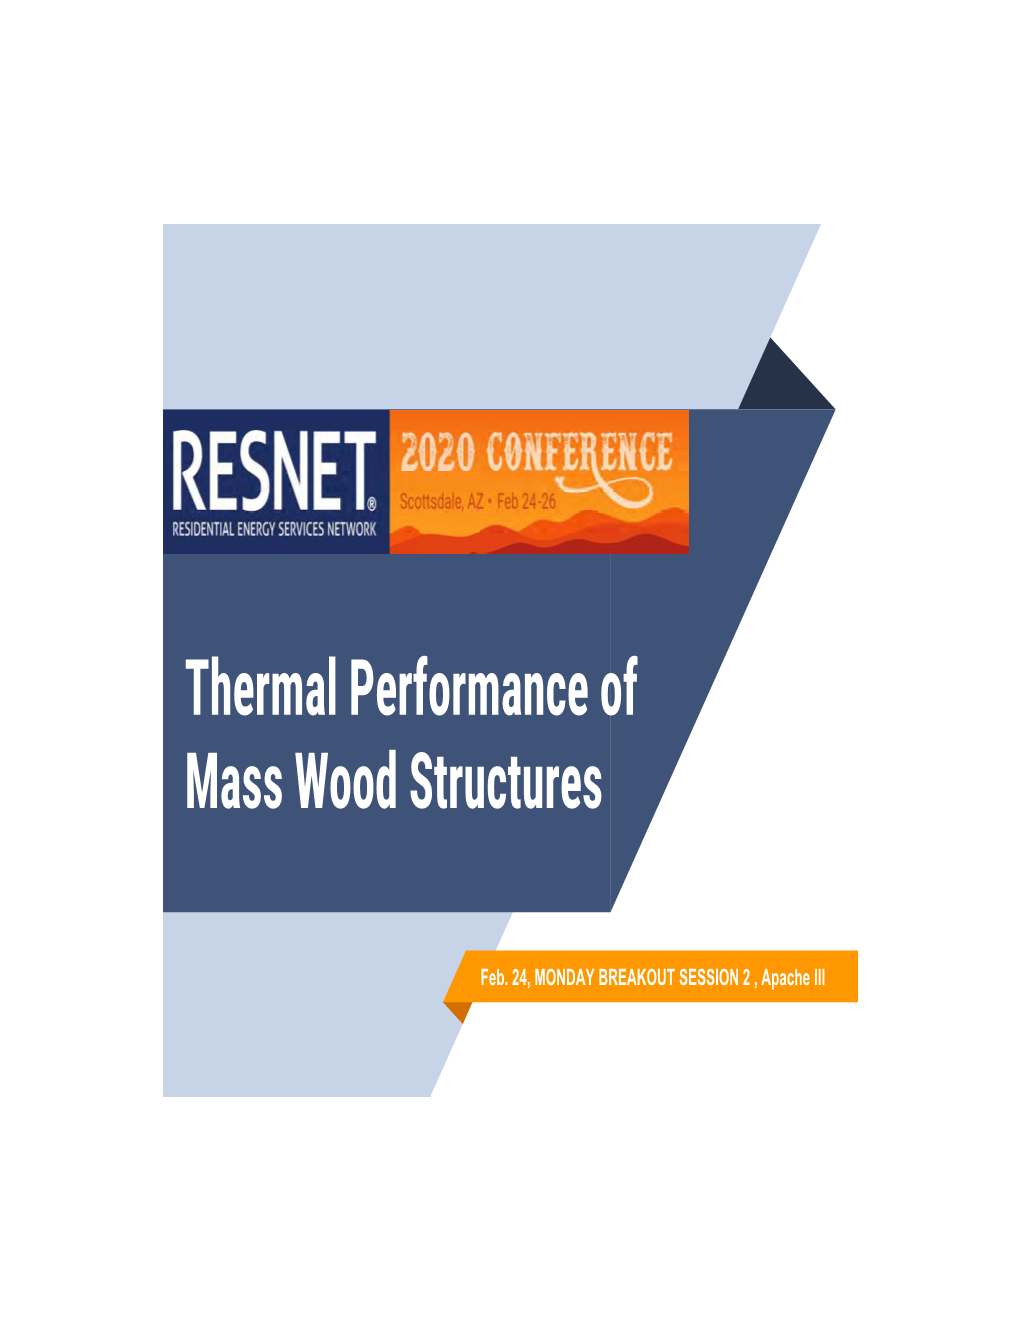 Thermal Performance of Mass Wood Structures